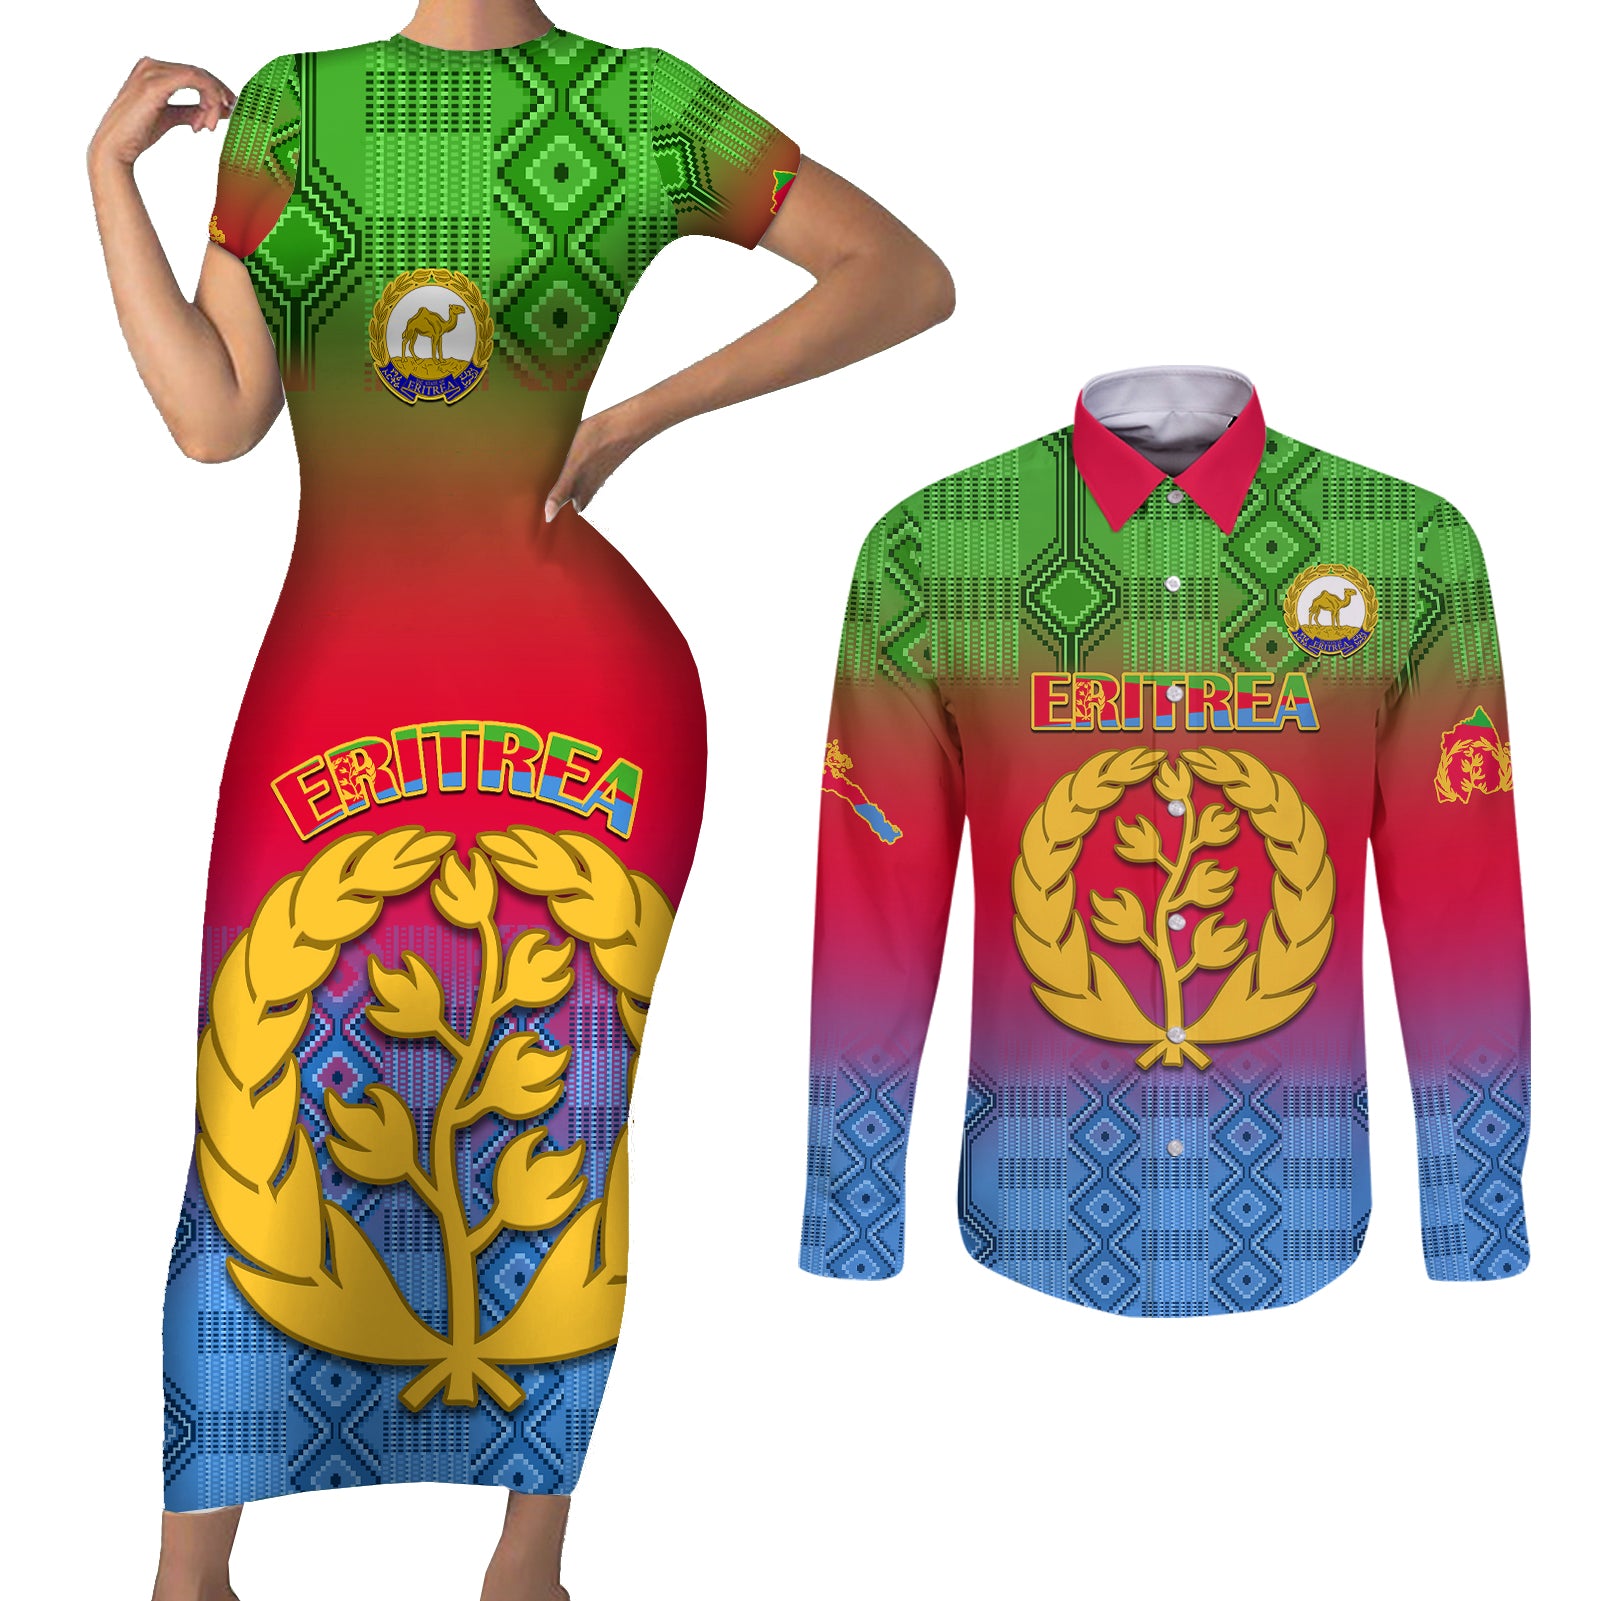 eritrea-revolution-day-couples-matching-short-sleeve-bodycon-dress-and-long-sleeve-button-shirts-eritean-kente-pattern-gradient-style